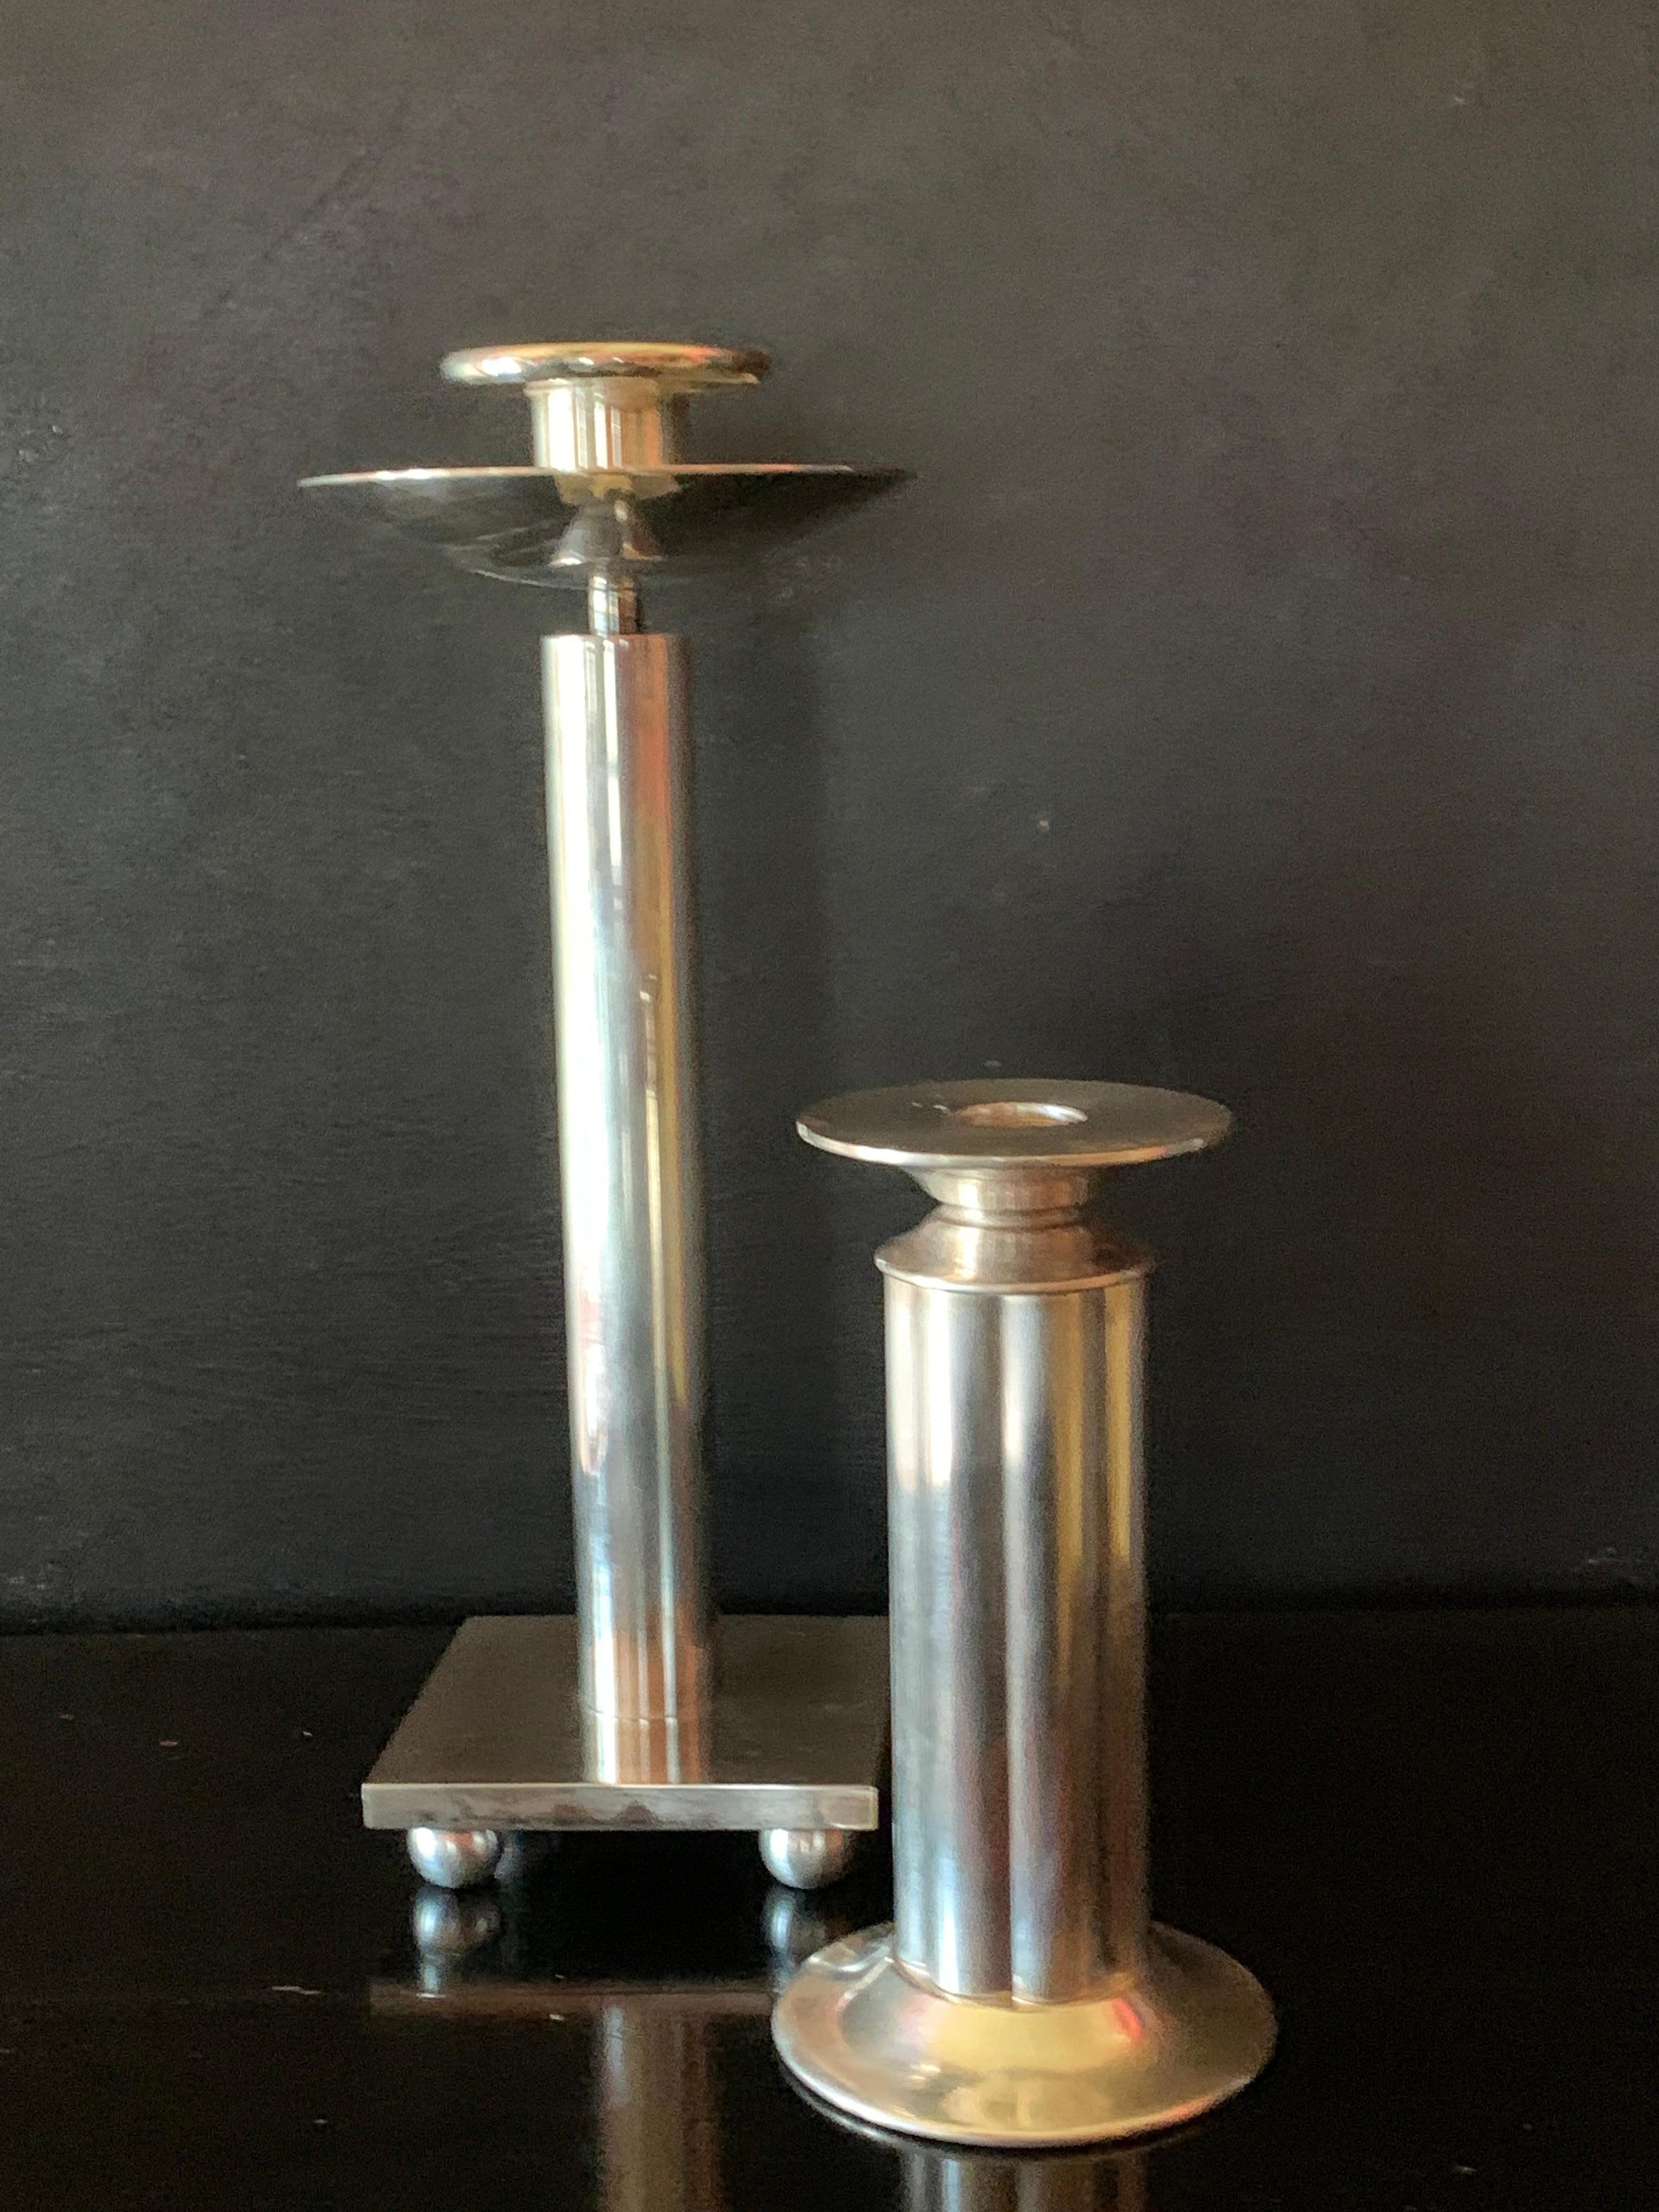 Stunning and architectural, the pair of silver plate candle sticks by Architect Richard Meier for Swid Powell are a collectors dream!

The taller of the two is simple, yet stunning and very solid - the shorter is ribbed and a delightful companion.